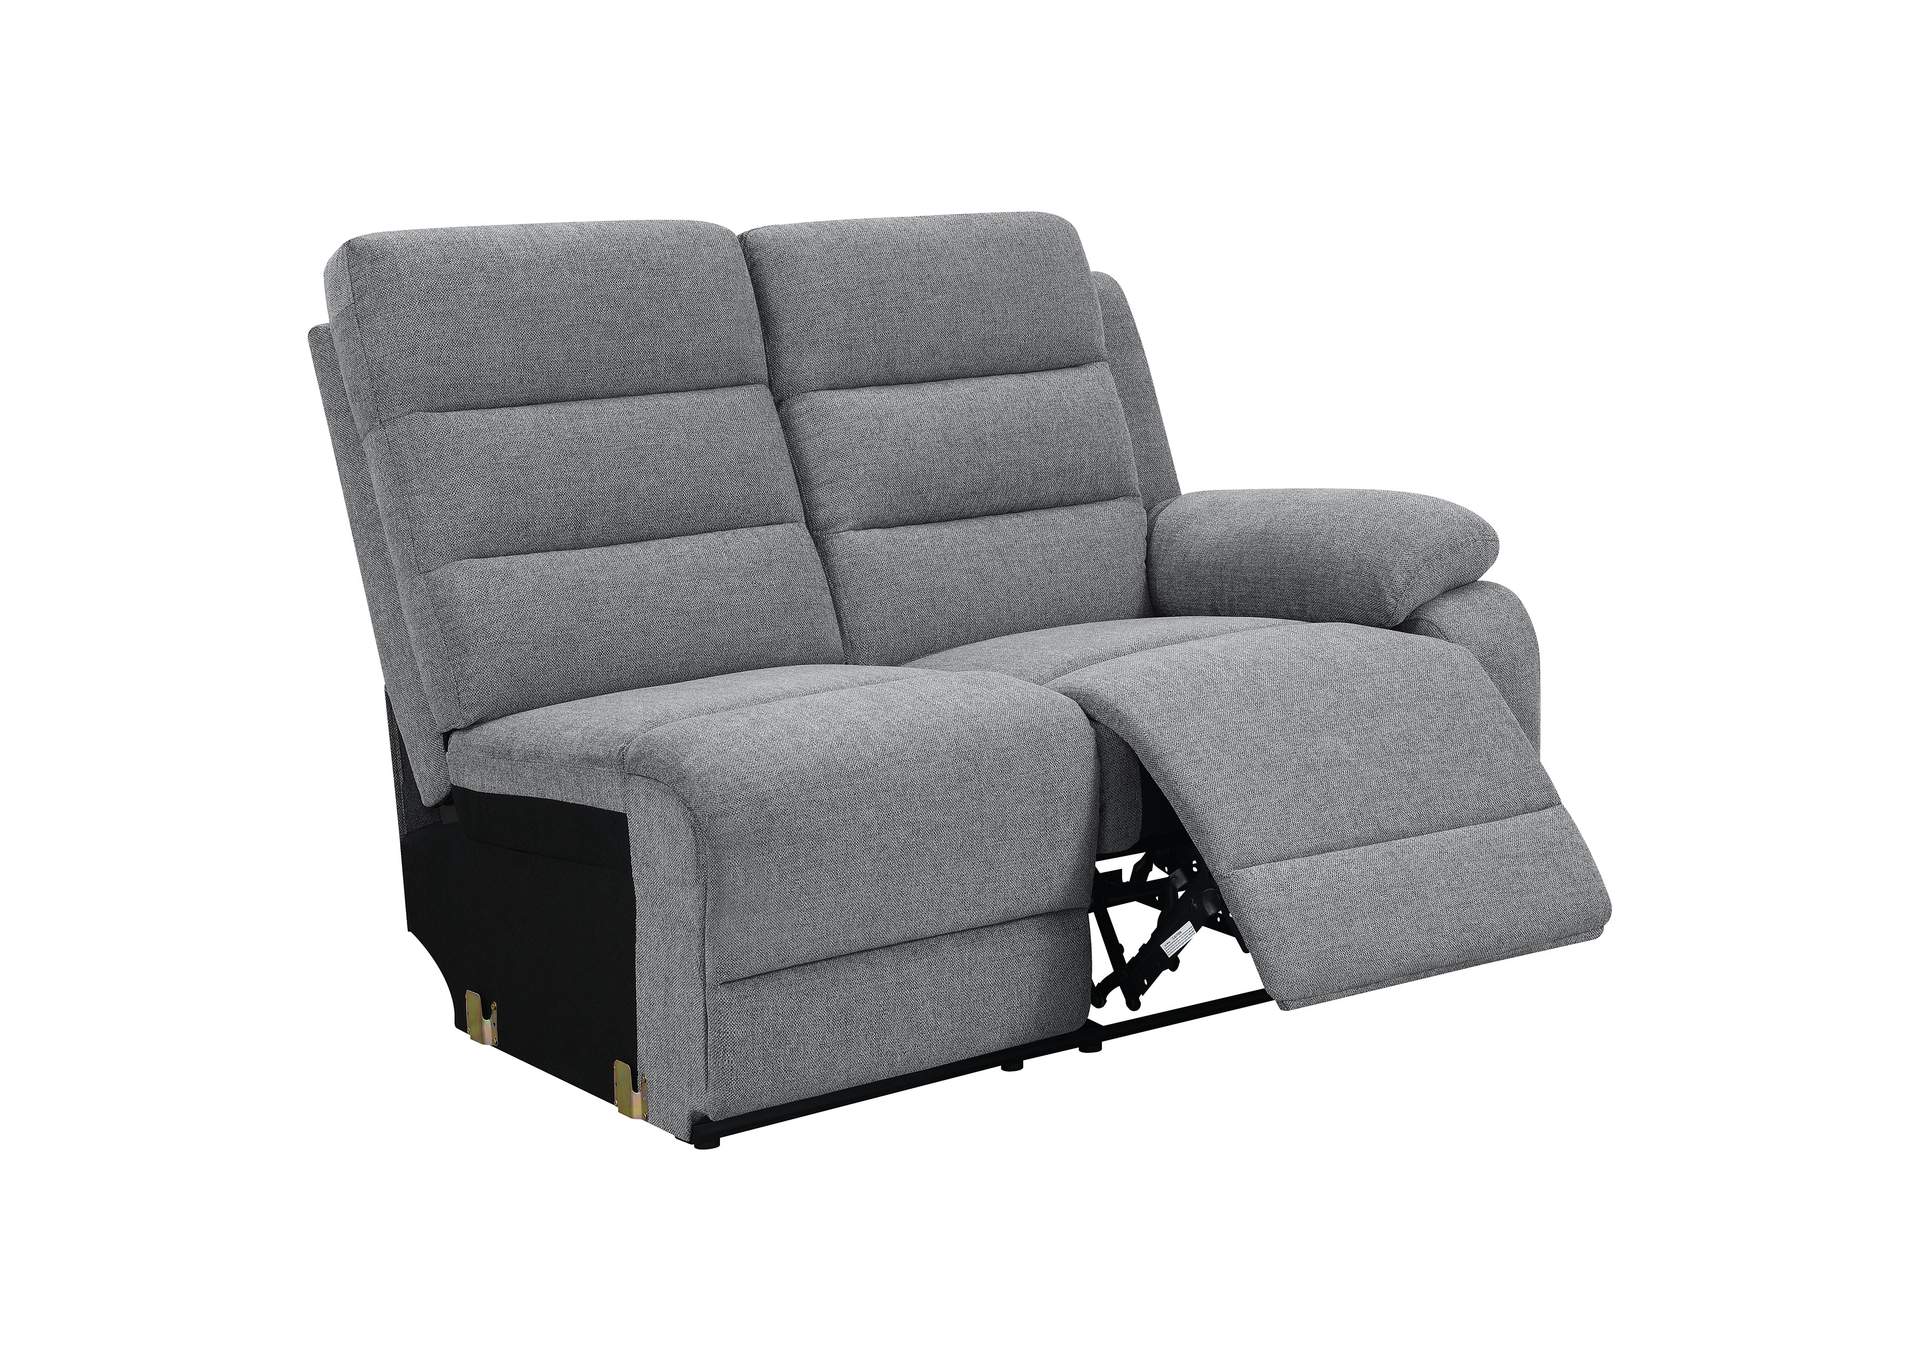 David 3-piece Upholstered Motion Sectional with Pillow Arms Smoke,Coaster Furniture